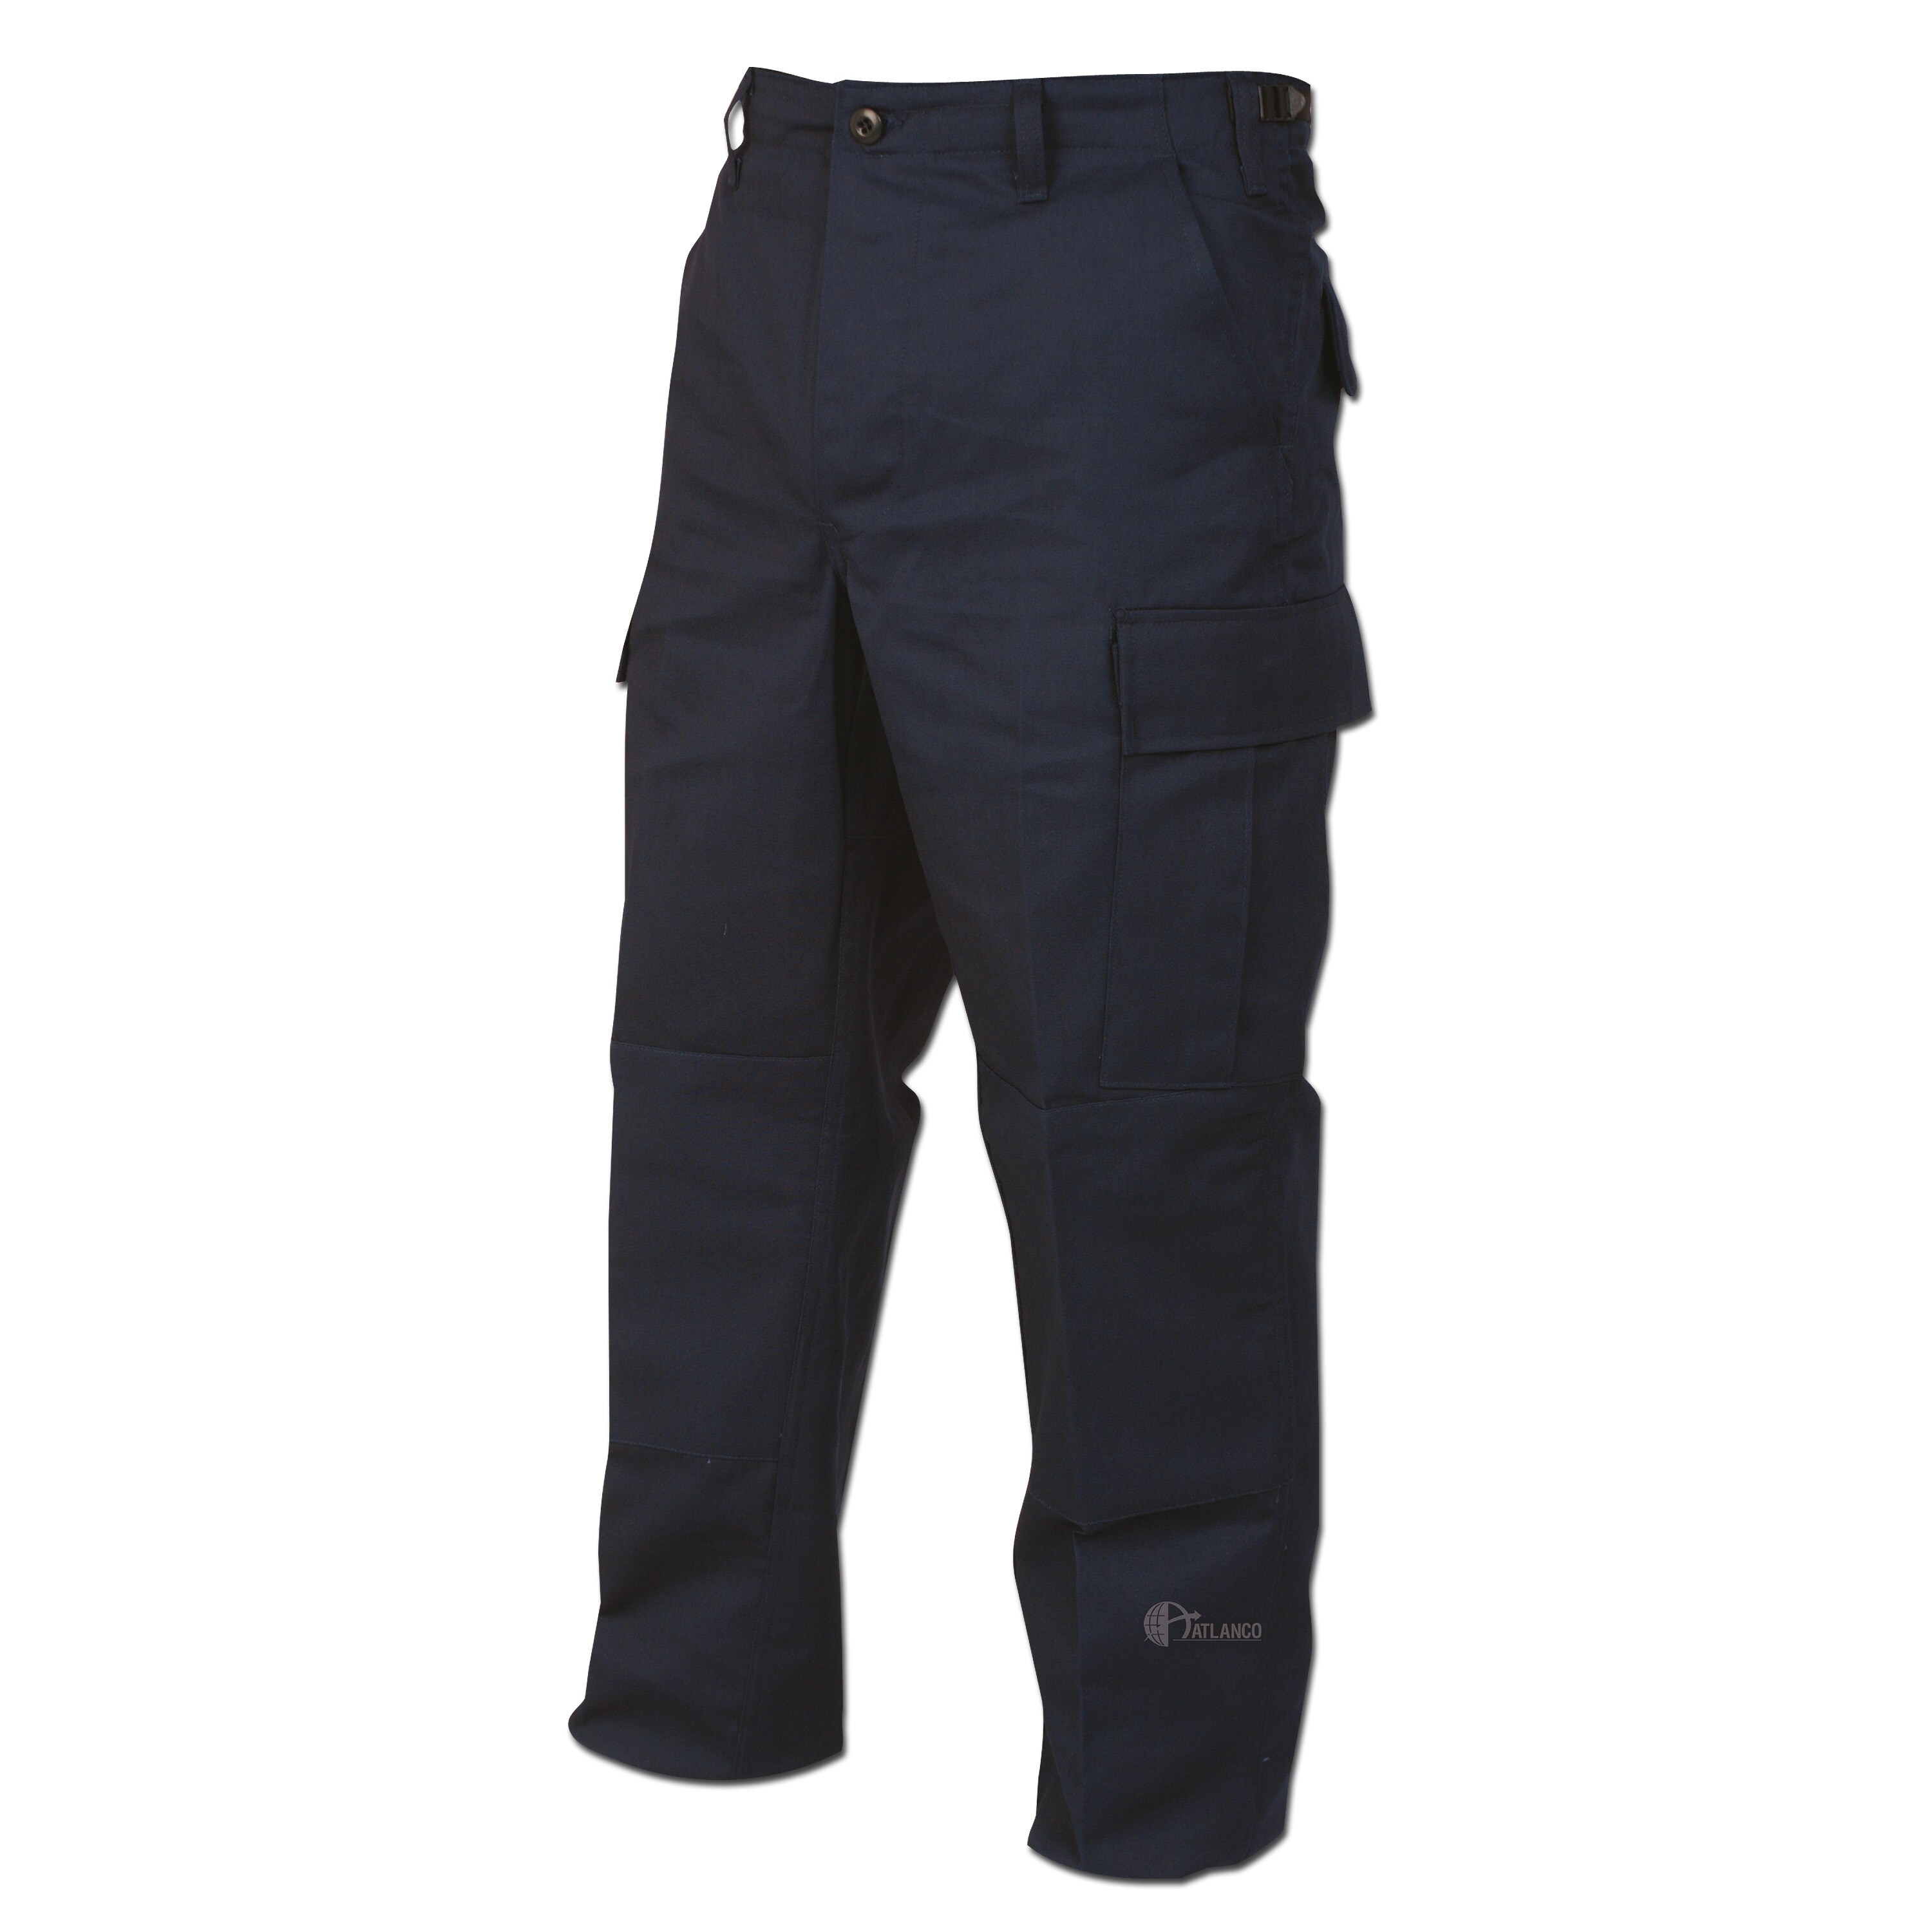 TRU-SPEC 1063027 24-7 Poly Cotton Ripstop Trousers Coyote W38 L34 for sale online 